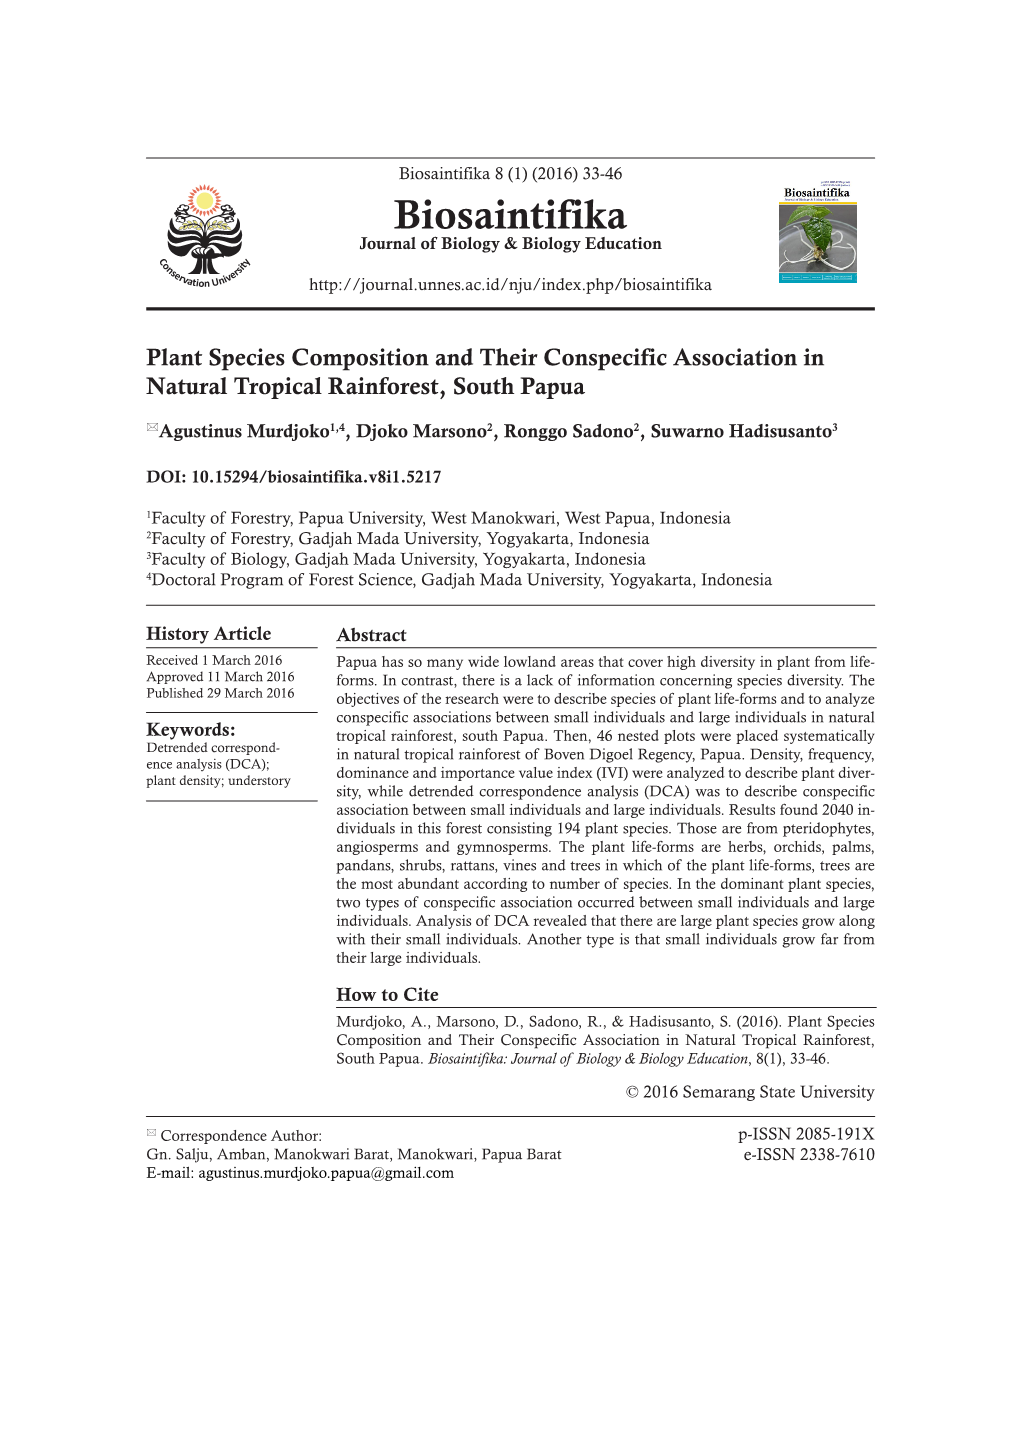 Plant Species Composition and Their Conspecific Association in Natural Tropical Rainforest, South Papua